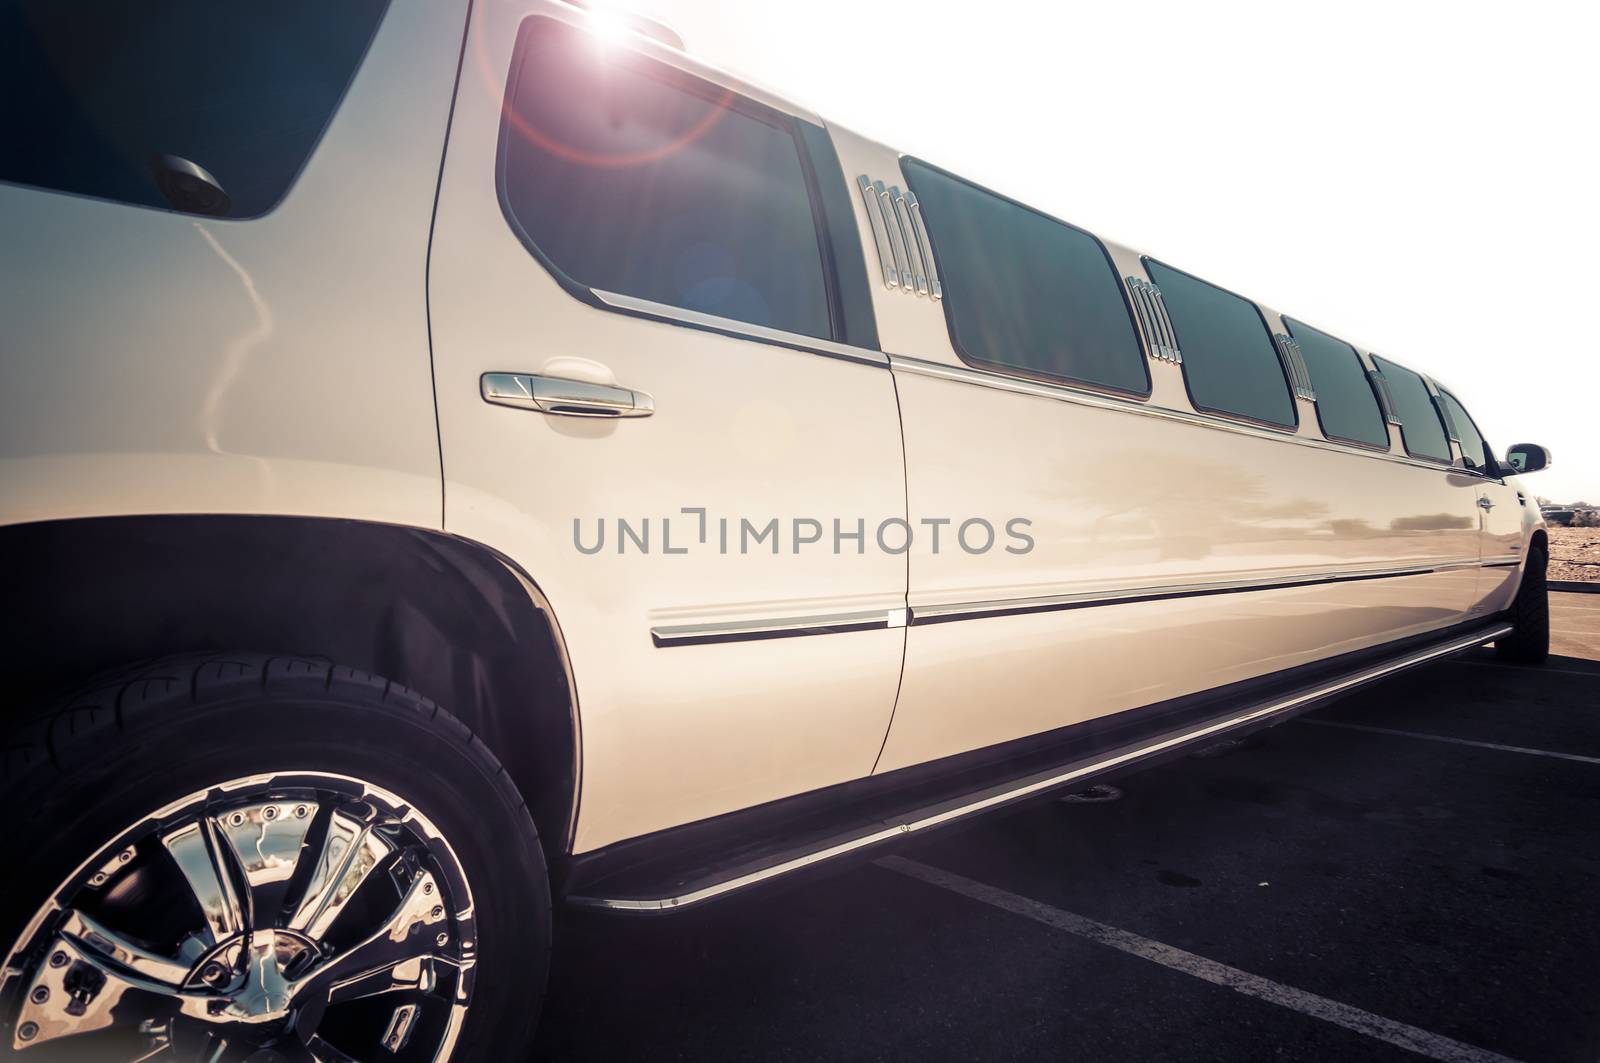 Stretch limo by Paulmatthewphoto